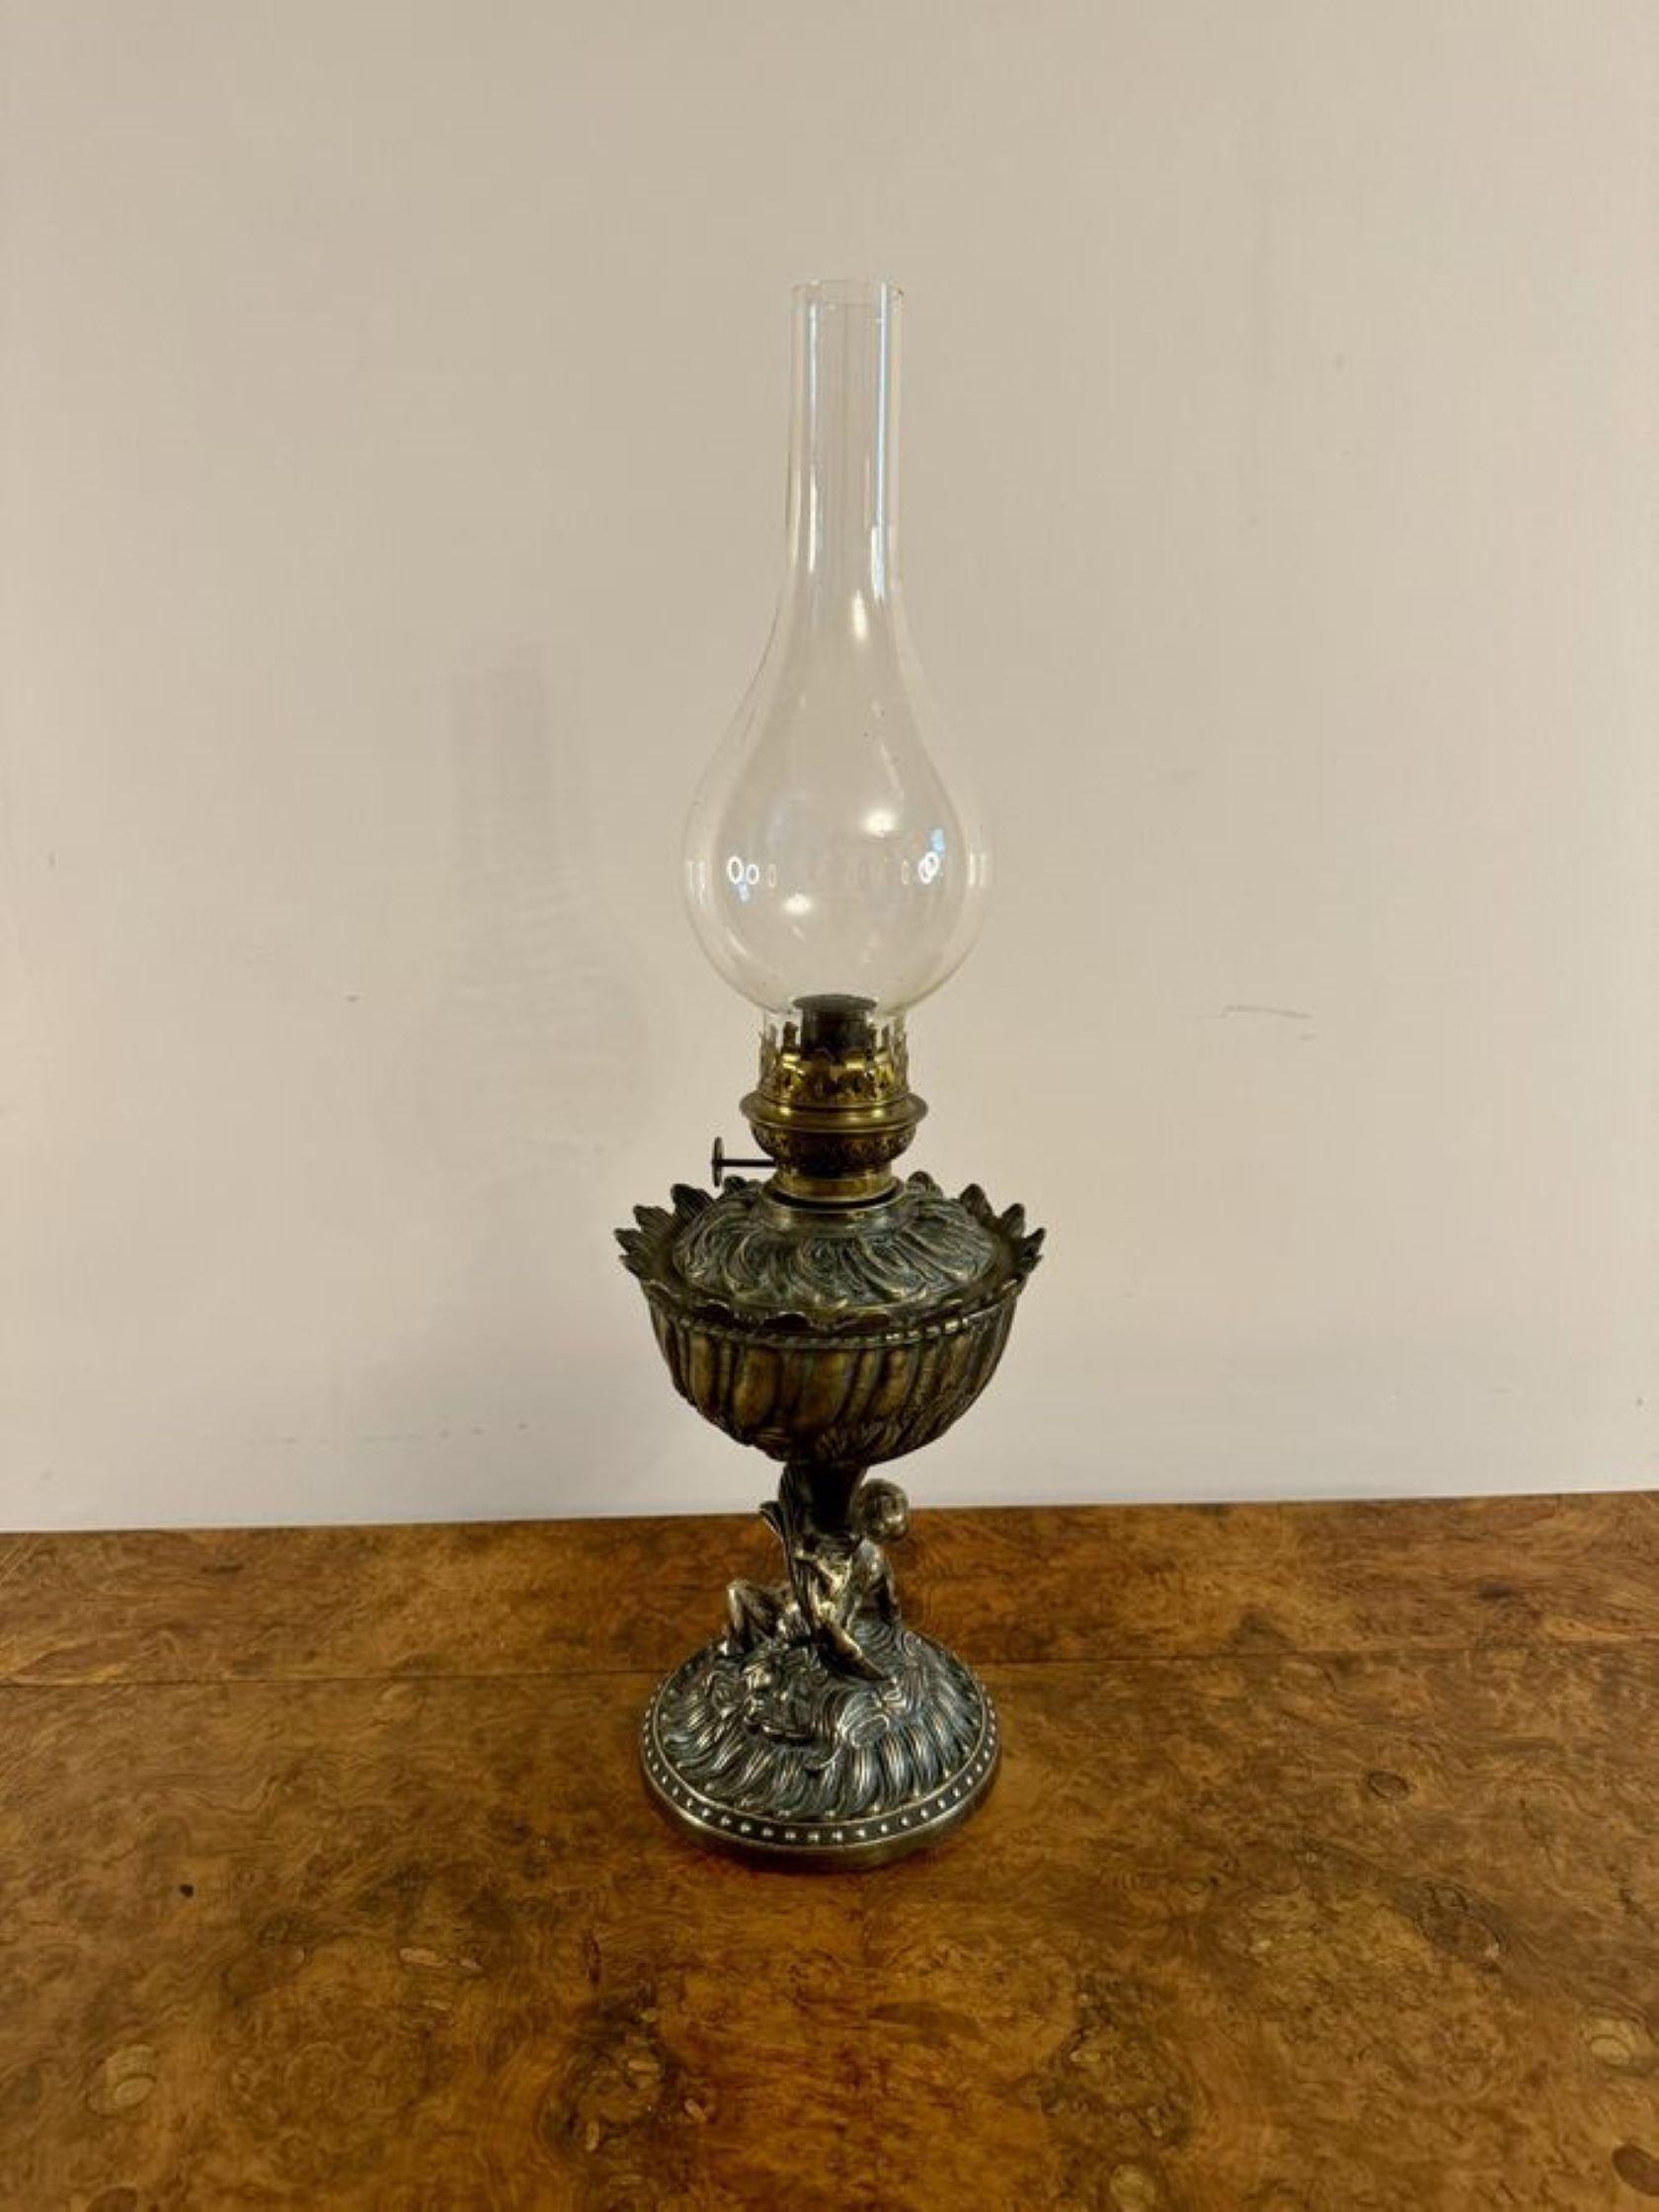 Unusual quality antique Victorian oil lamp having a quality antique Victorian oil lamp with a bulbous glass chimney, a single burner, a reeded column with wonderful scroll decoration, having a cherub mounted above the circular base. 

D. 1880